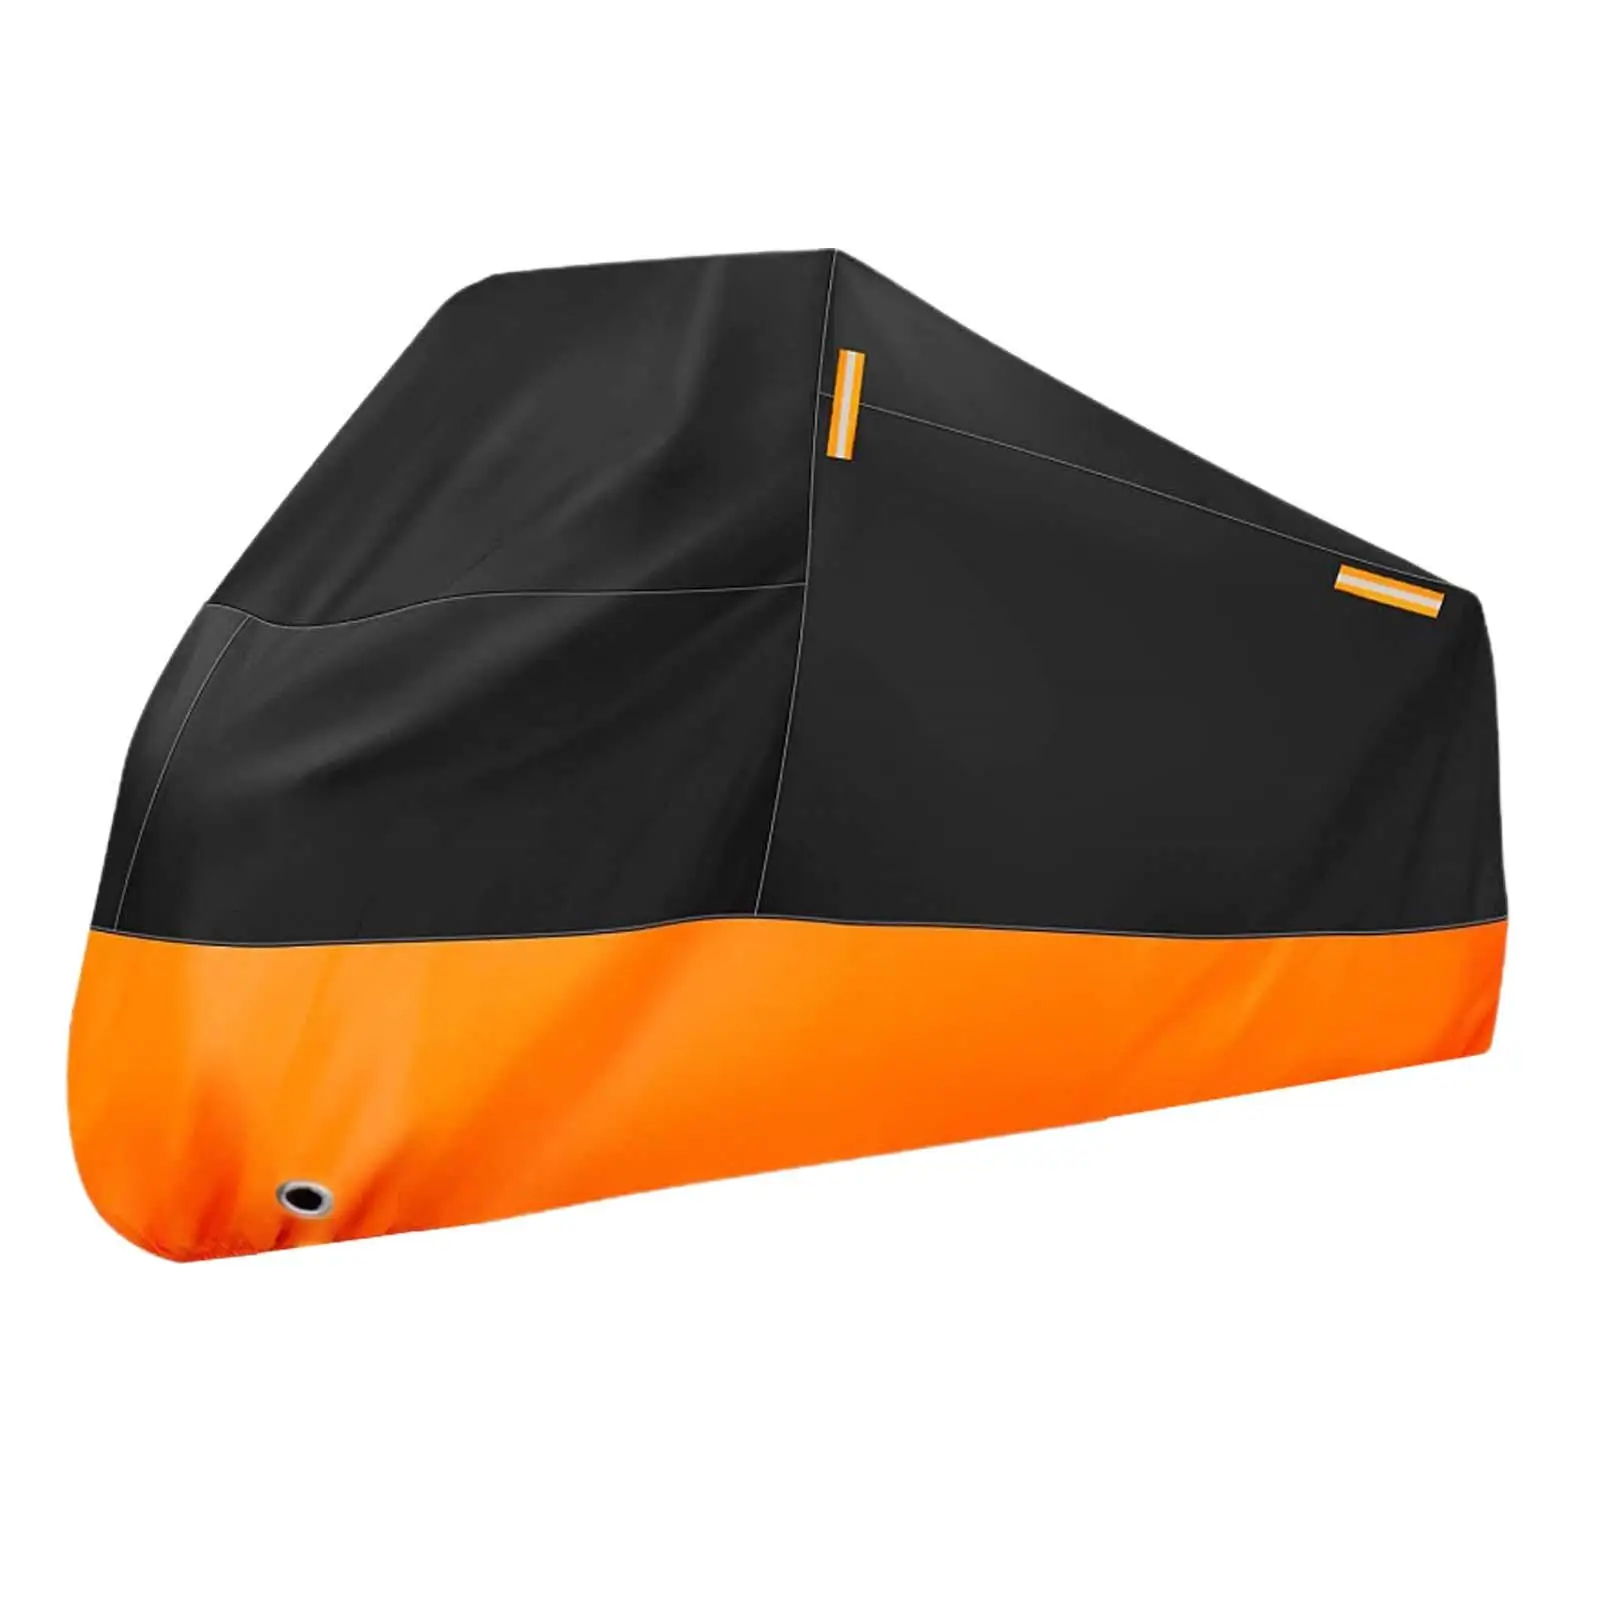 Universal Motorcycle Cover Wear Resistant Durable Outdoor Sun Protection Dustproof Lock Holes Design Windproof Rain Cover